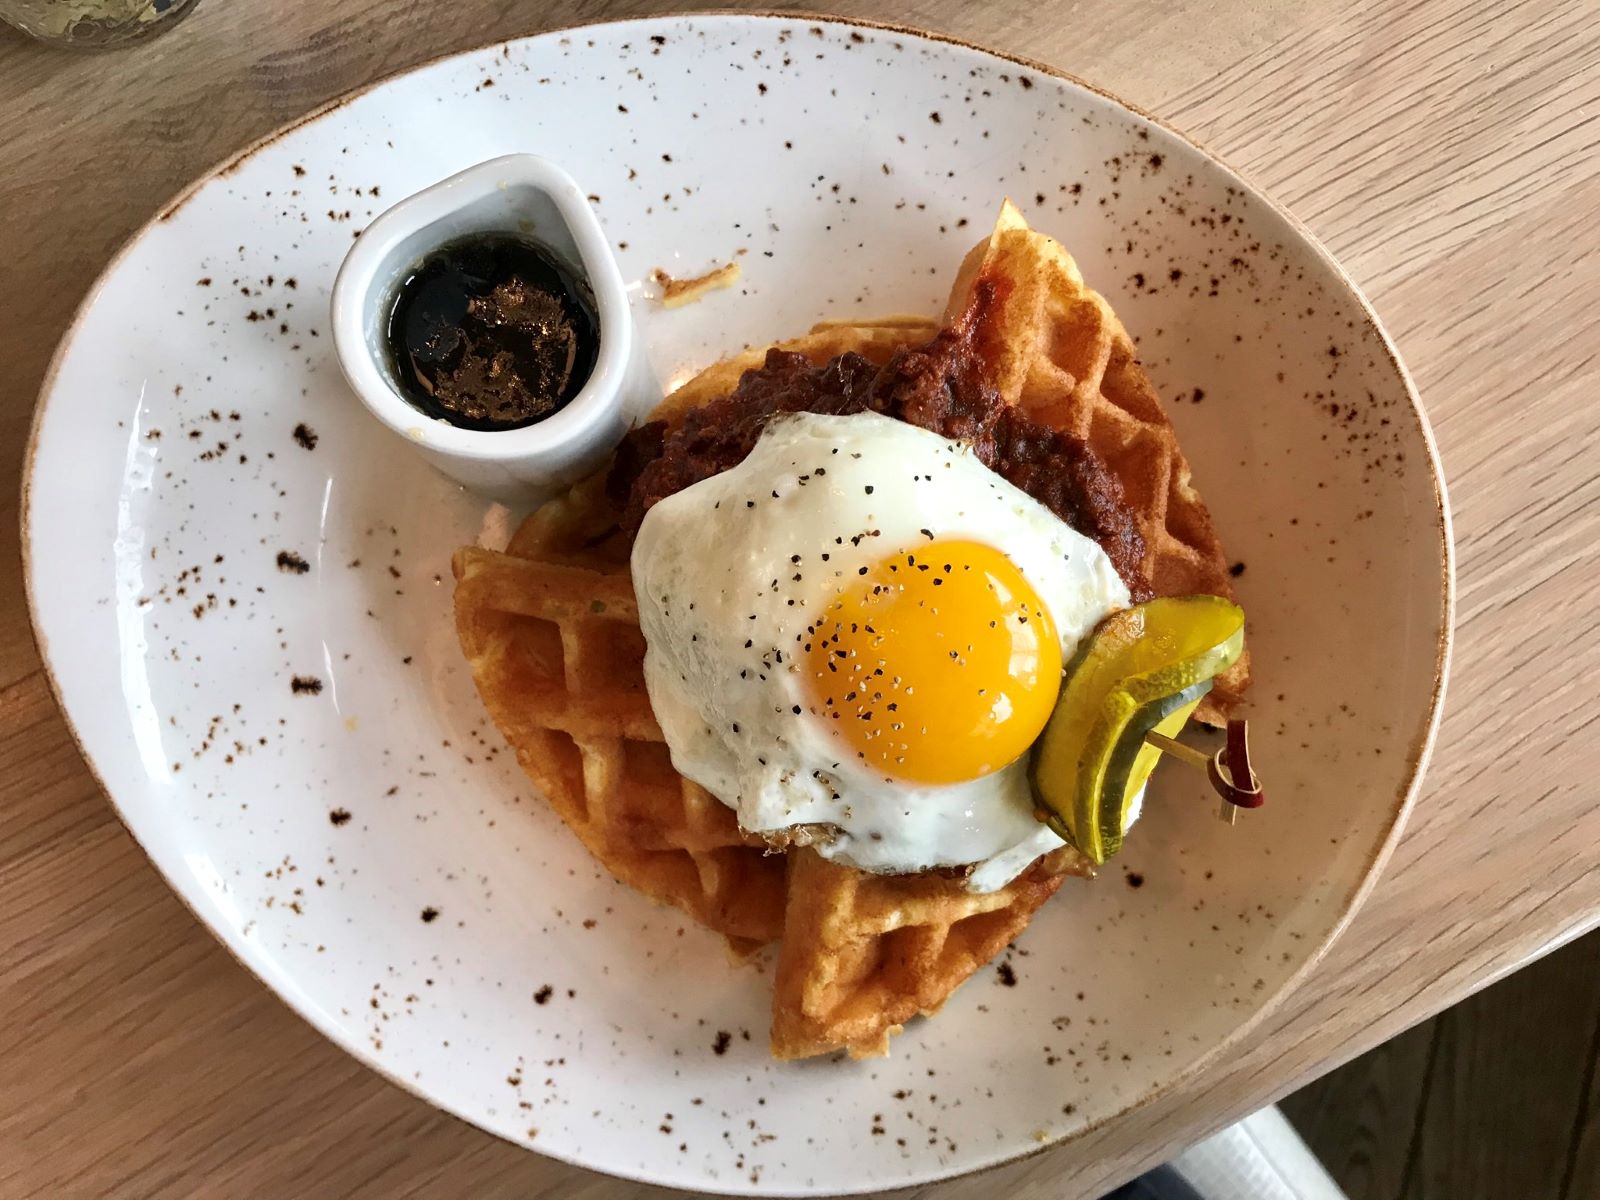 Top Breakfast And Brunch Spots In Nashville: Food Review And Insider Tips